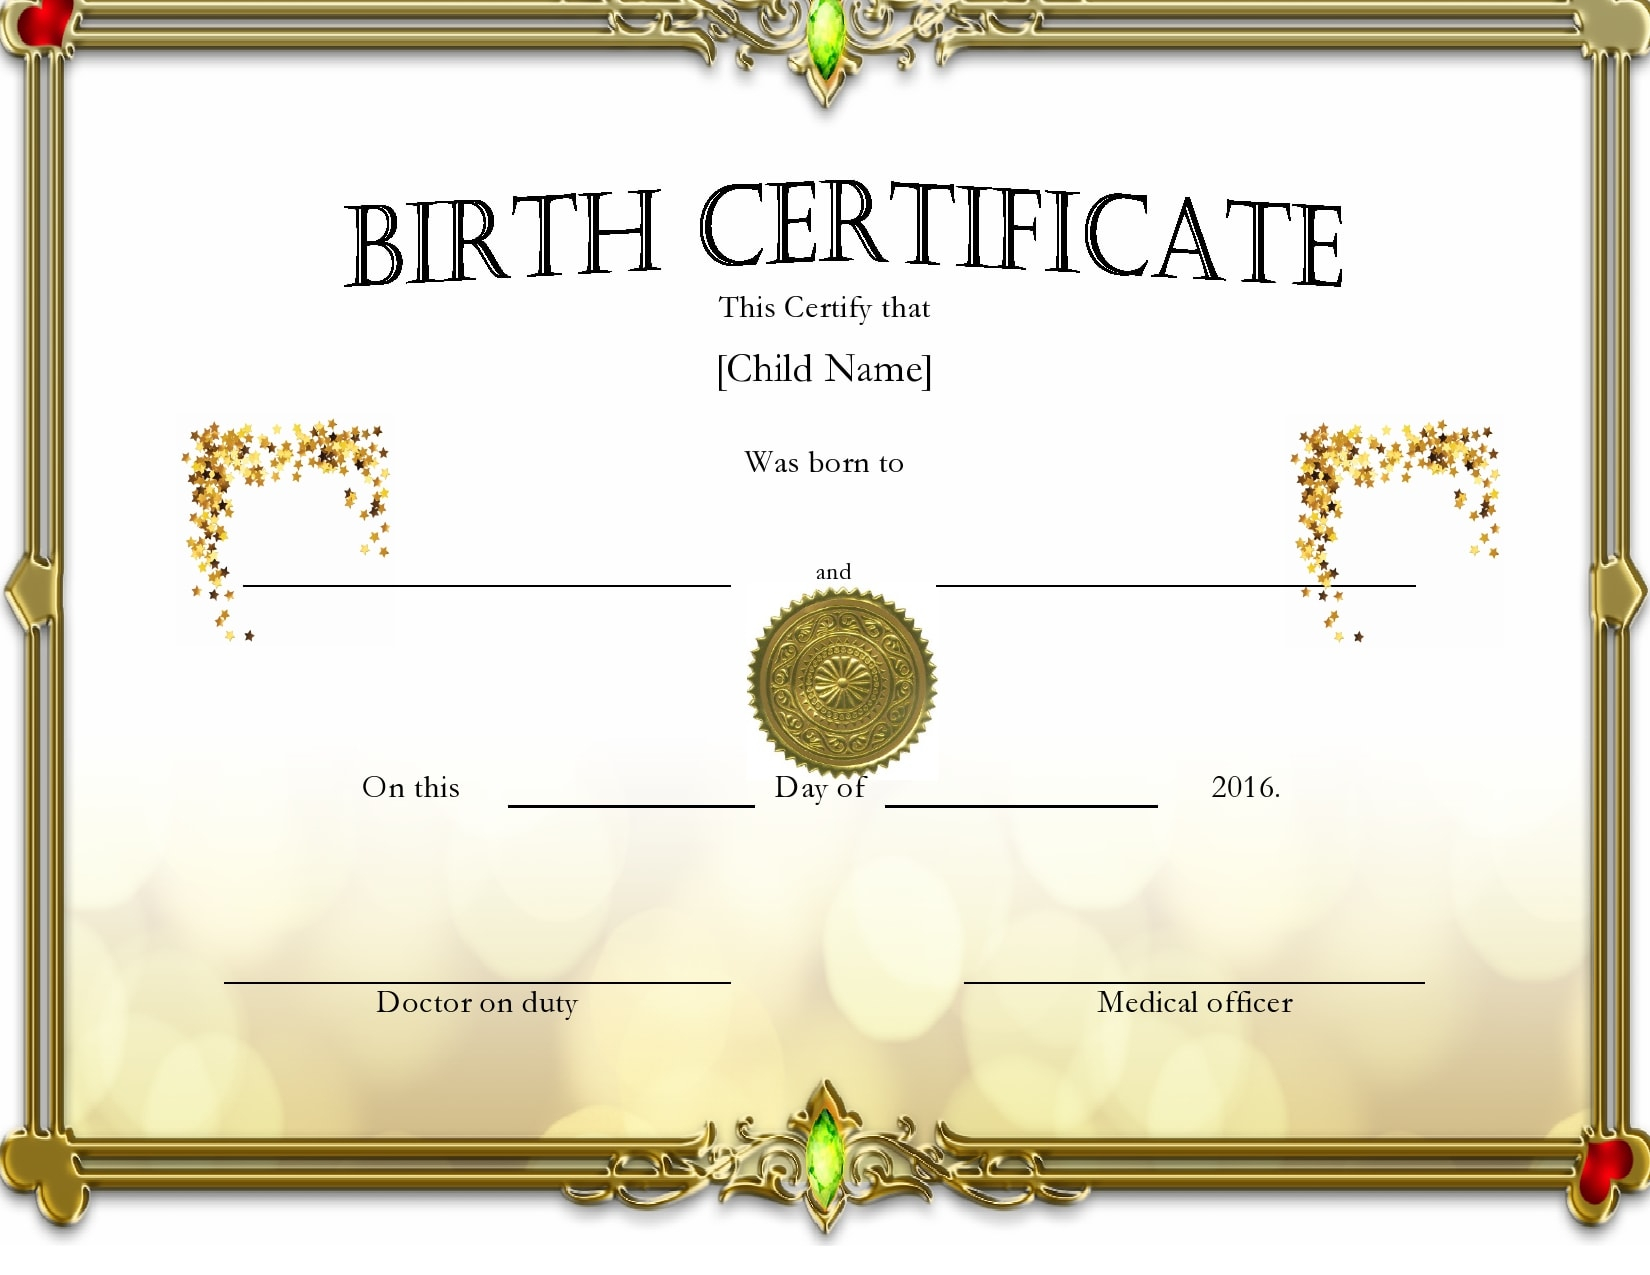 10 Blank Birth Certificate Templates (& Examples) - PrintableTemplates For Official Birth Certificate Template